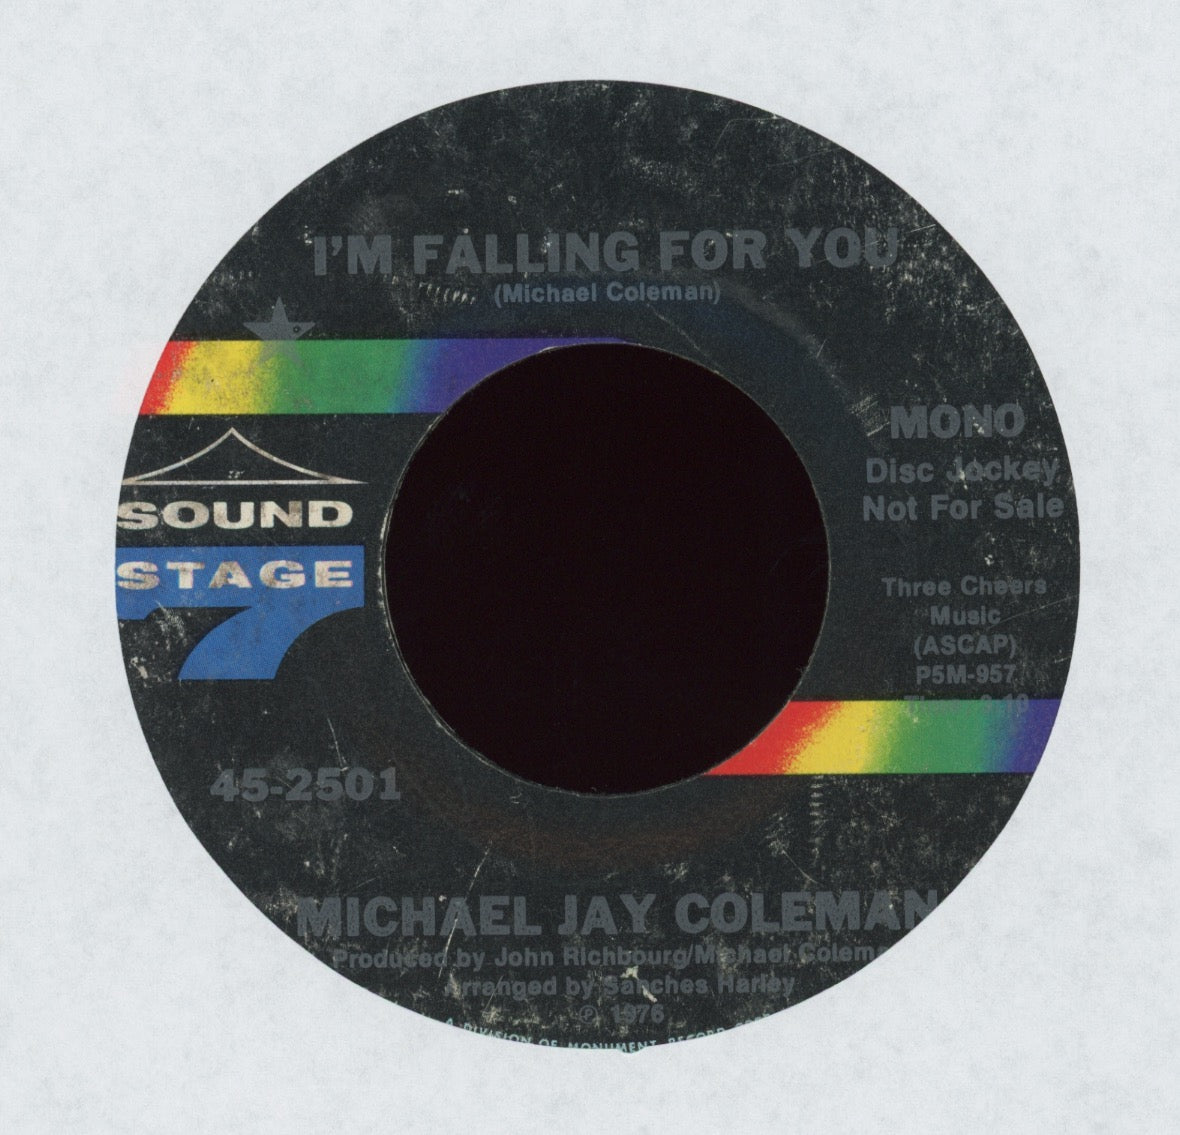 Michael Jay Coleman - I'm Falling For You on Sound Stage 7 Promo